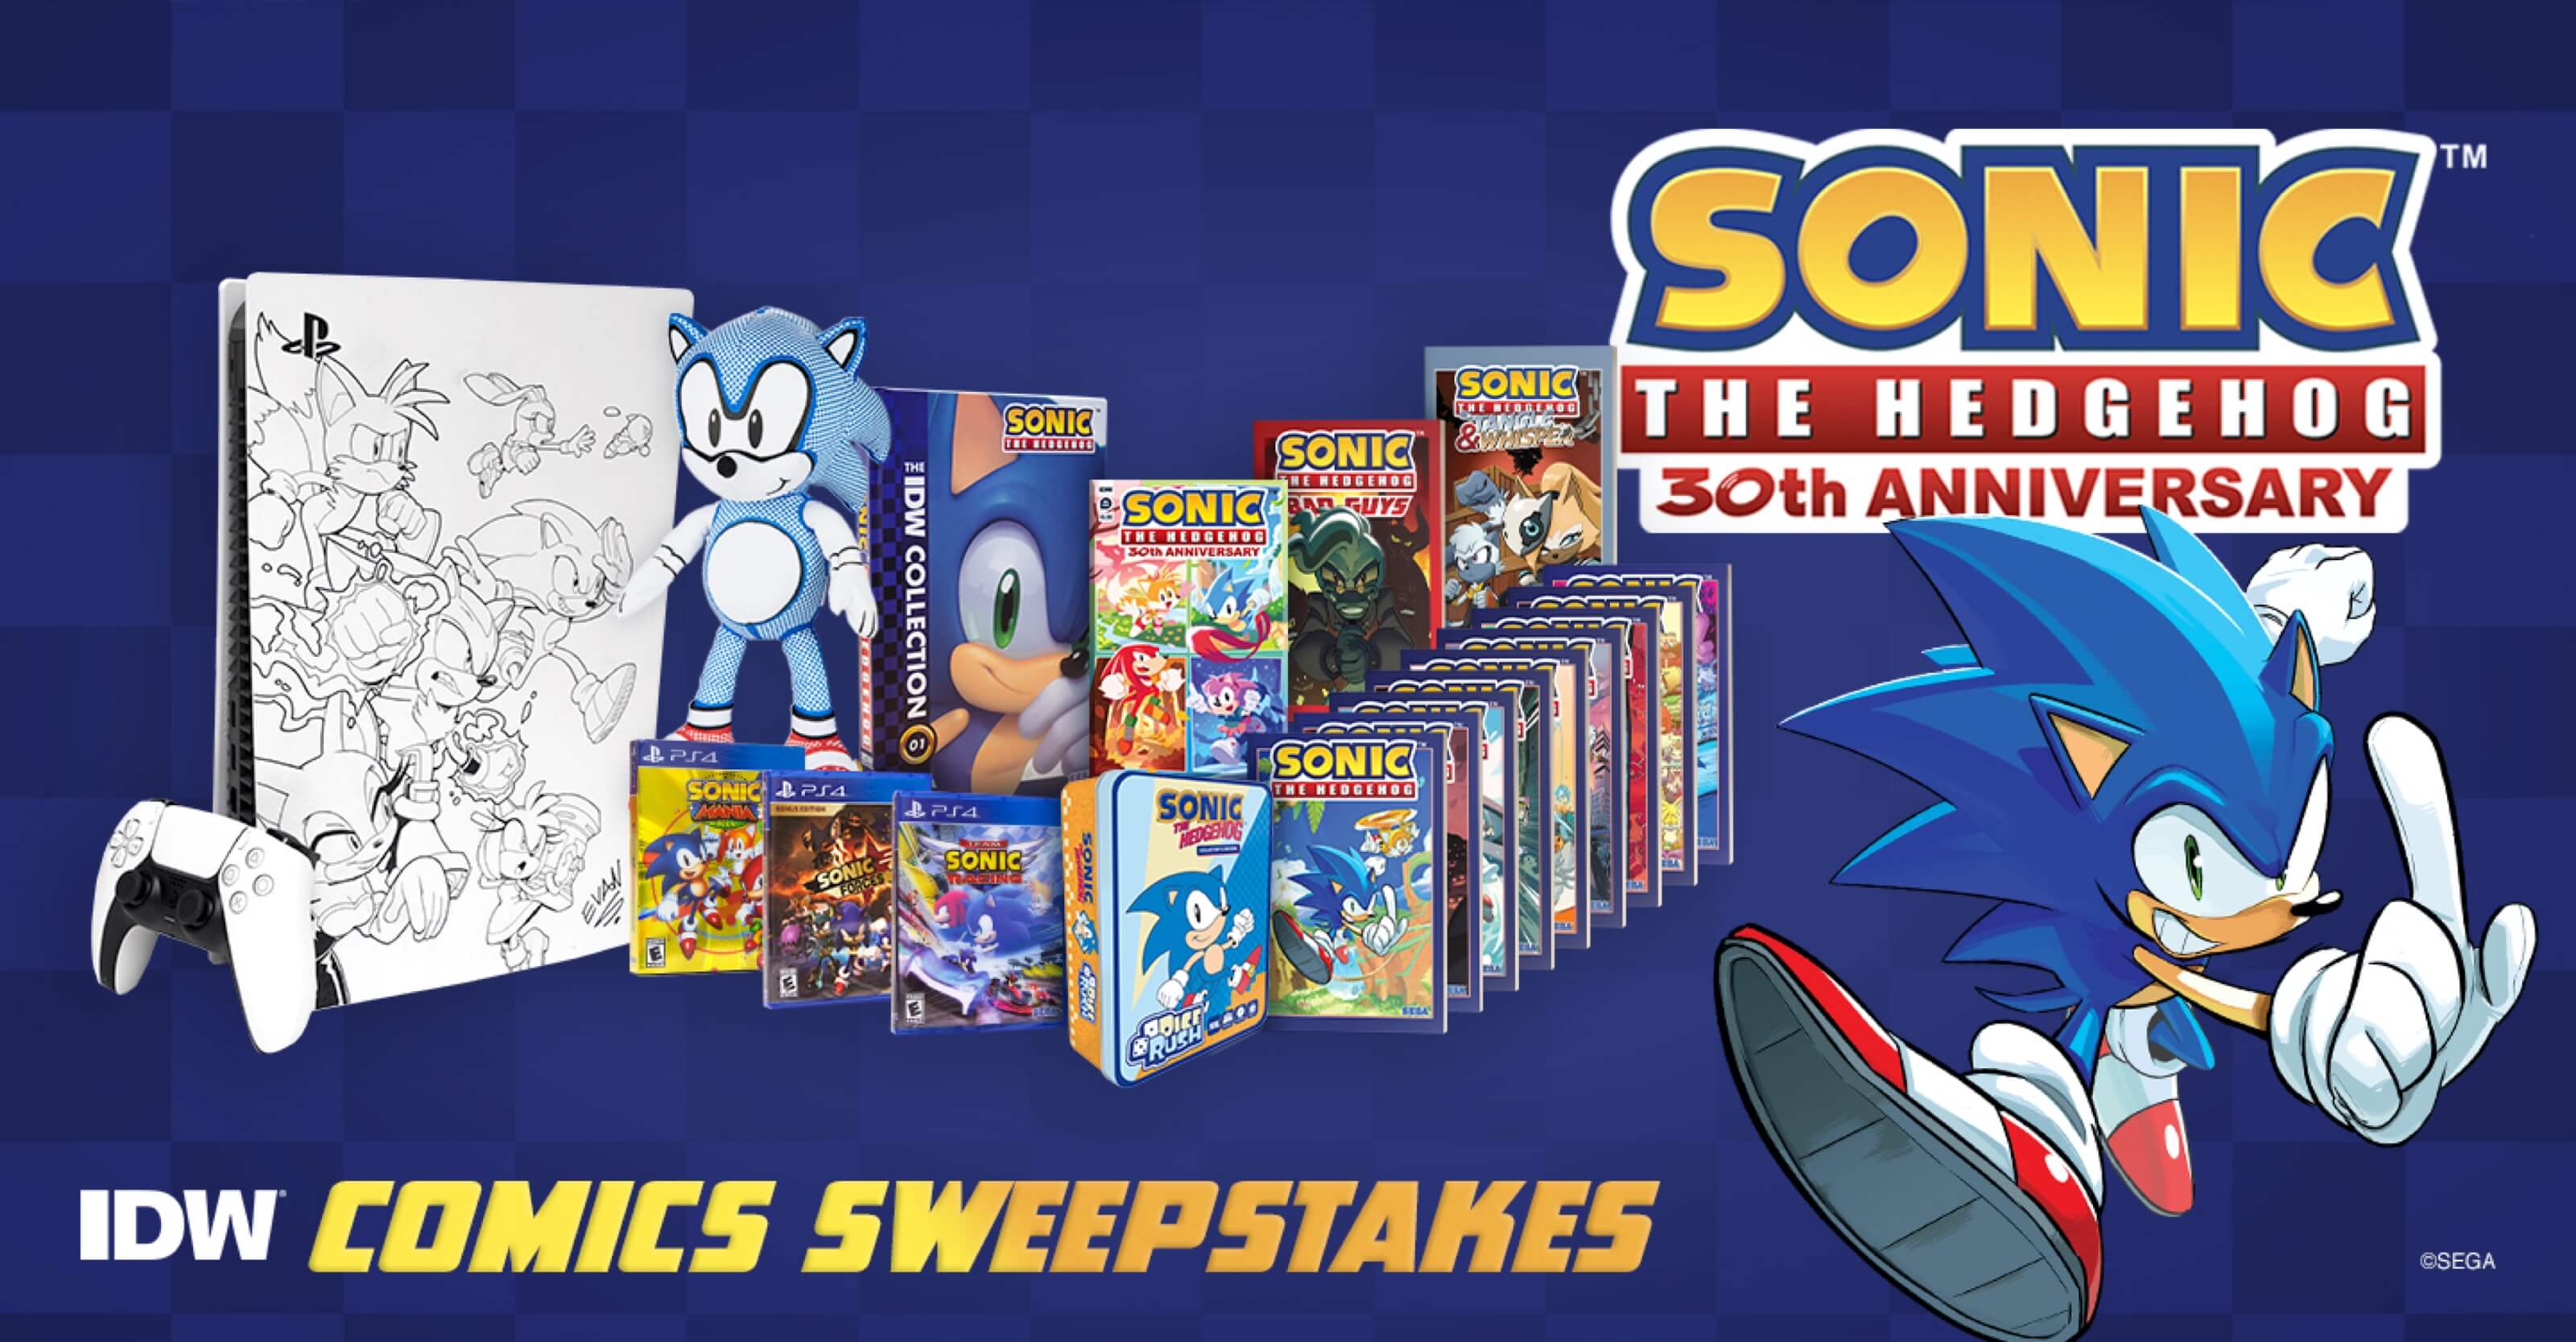 The Sonic 30th Anniversary IDW Comics Sweepstakes